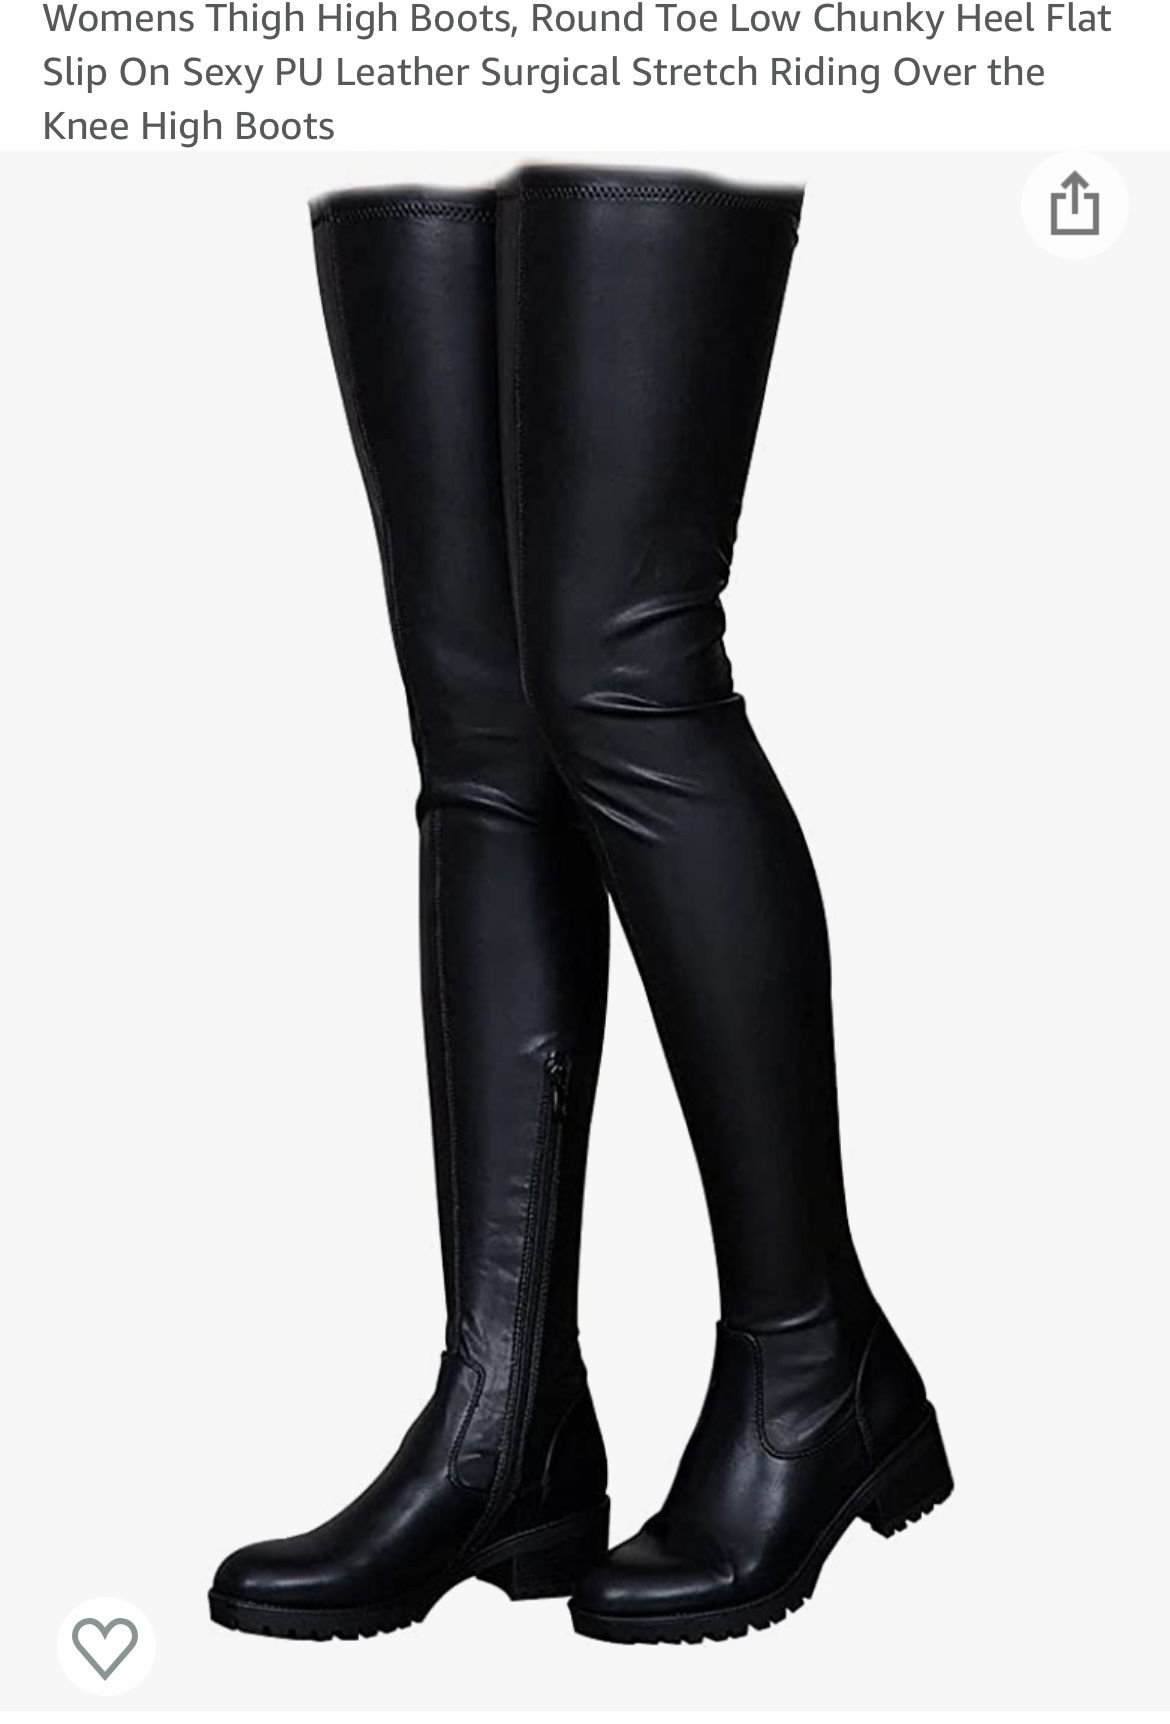 Thigh High Boots Size 8 Womens 